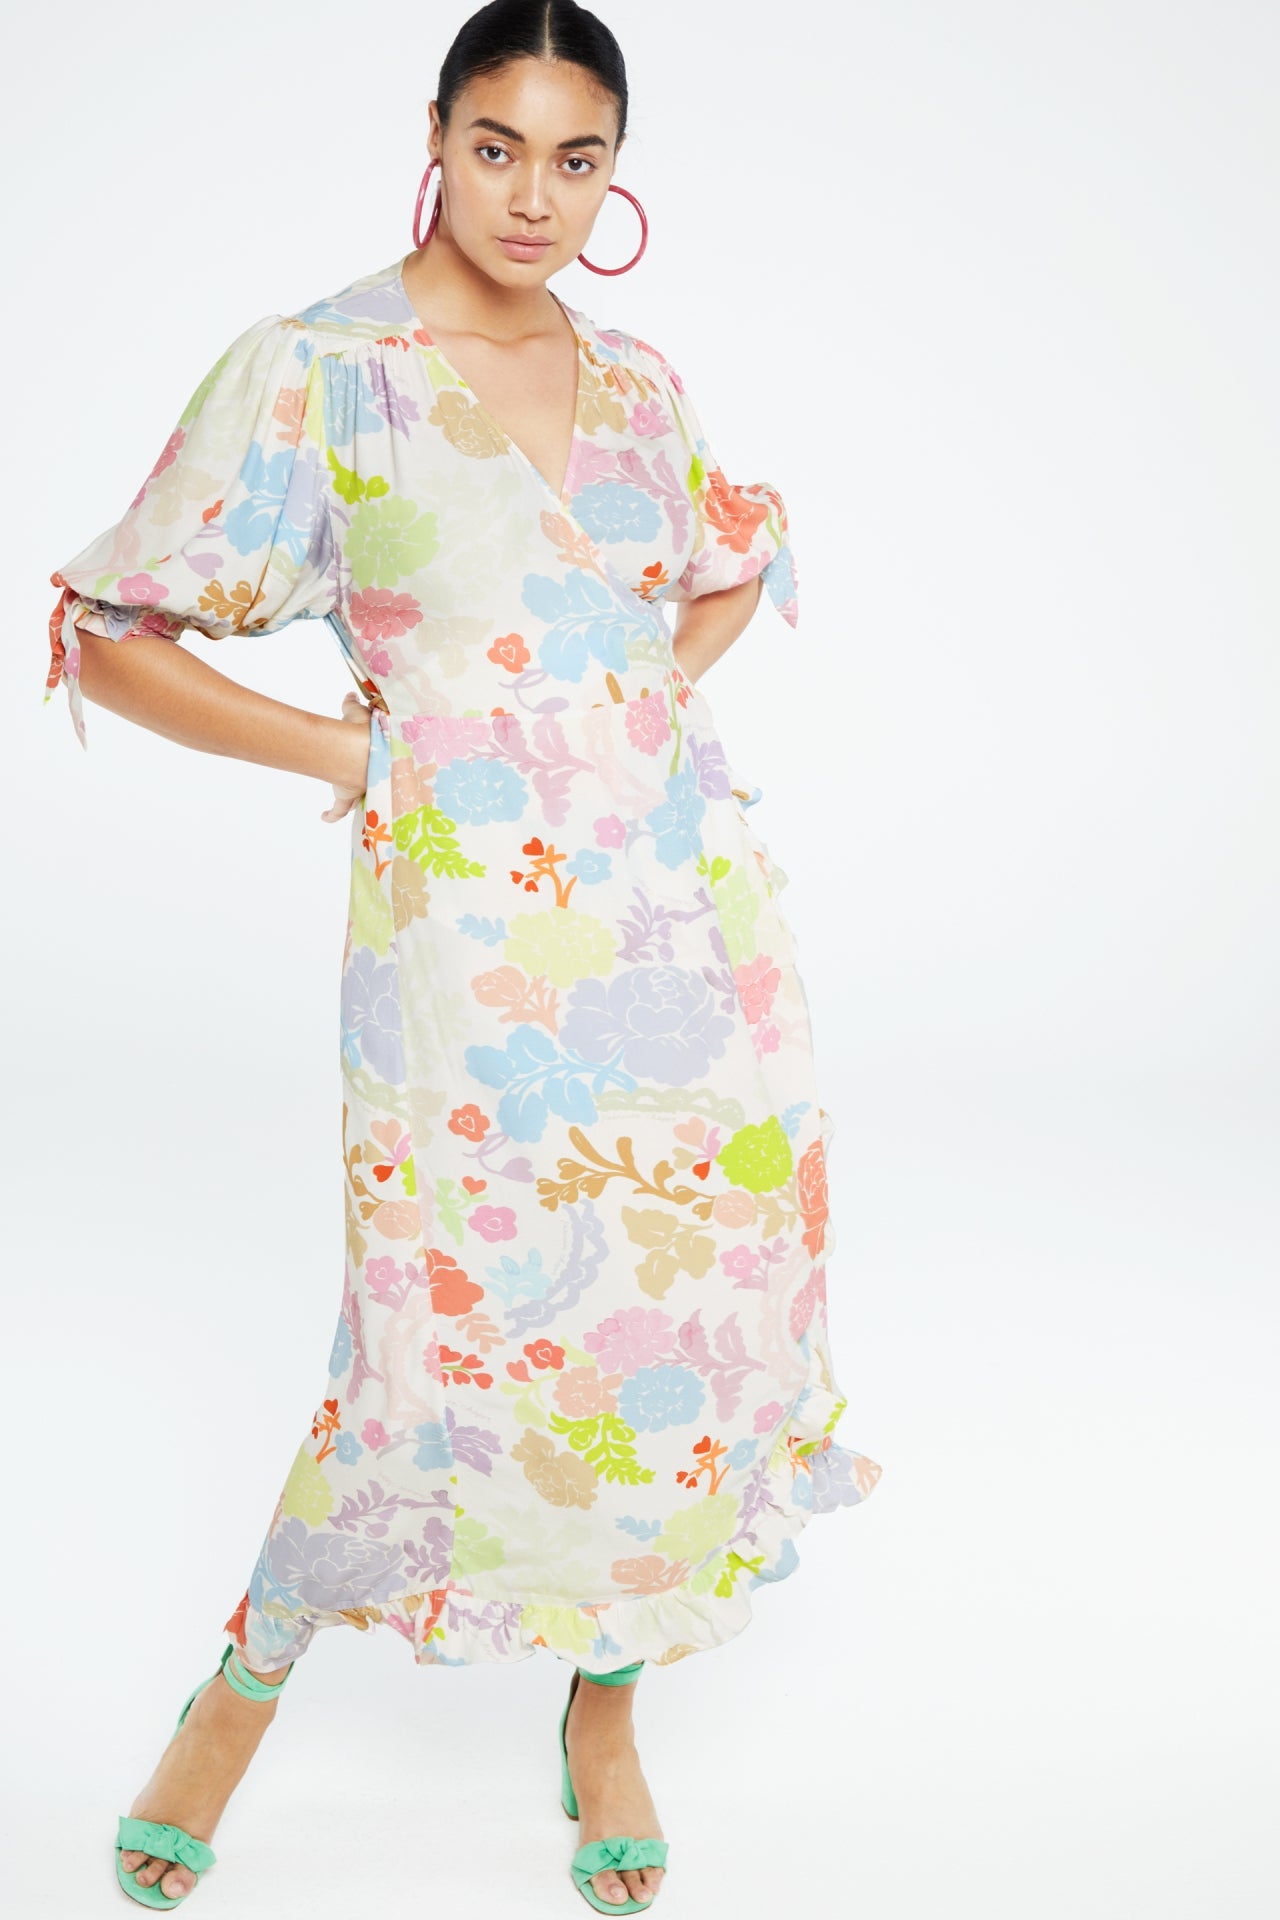 Multi colour on ecru wrap dress with short sleeves and tie cuffs